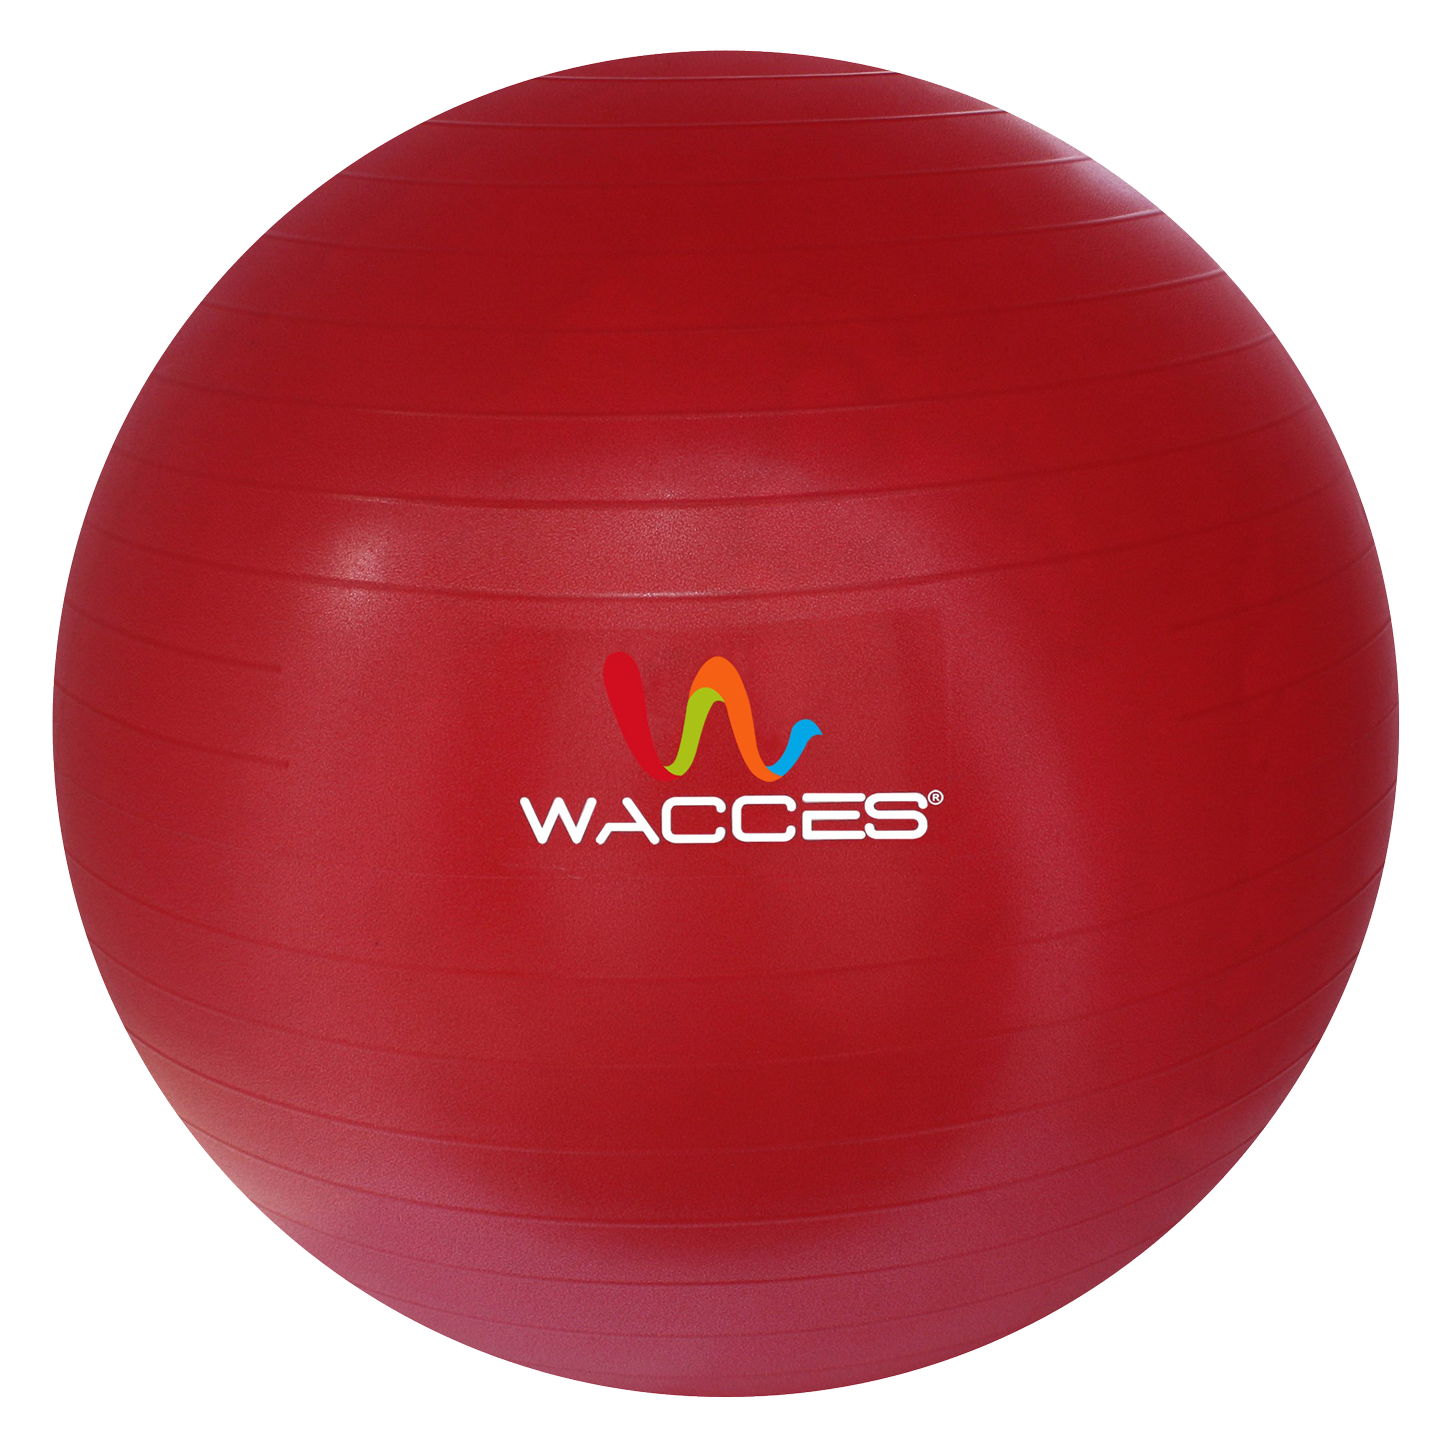 A Red Ball With A Logo On It